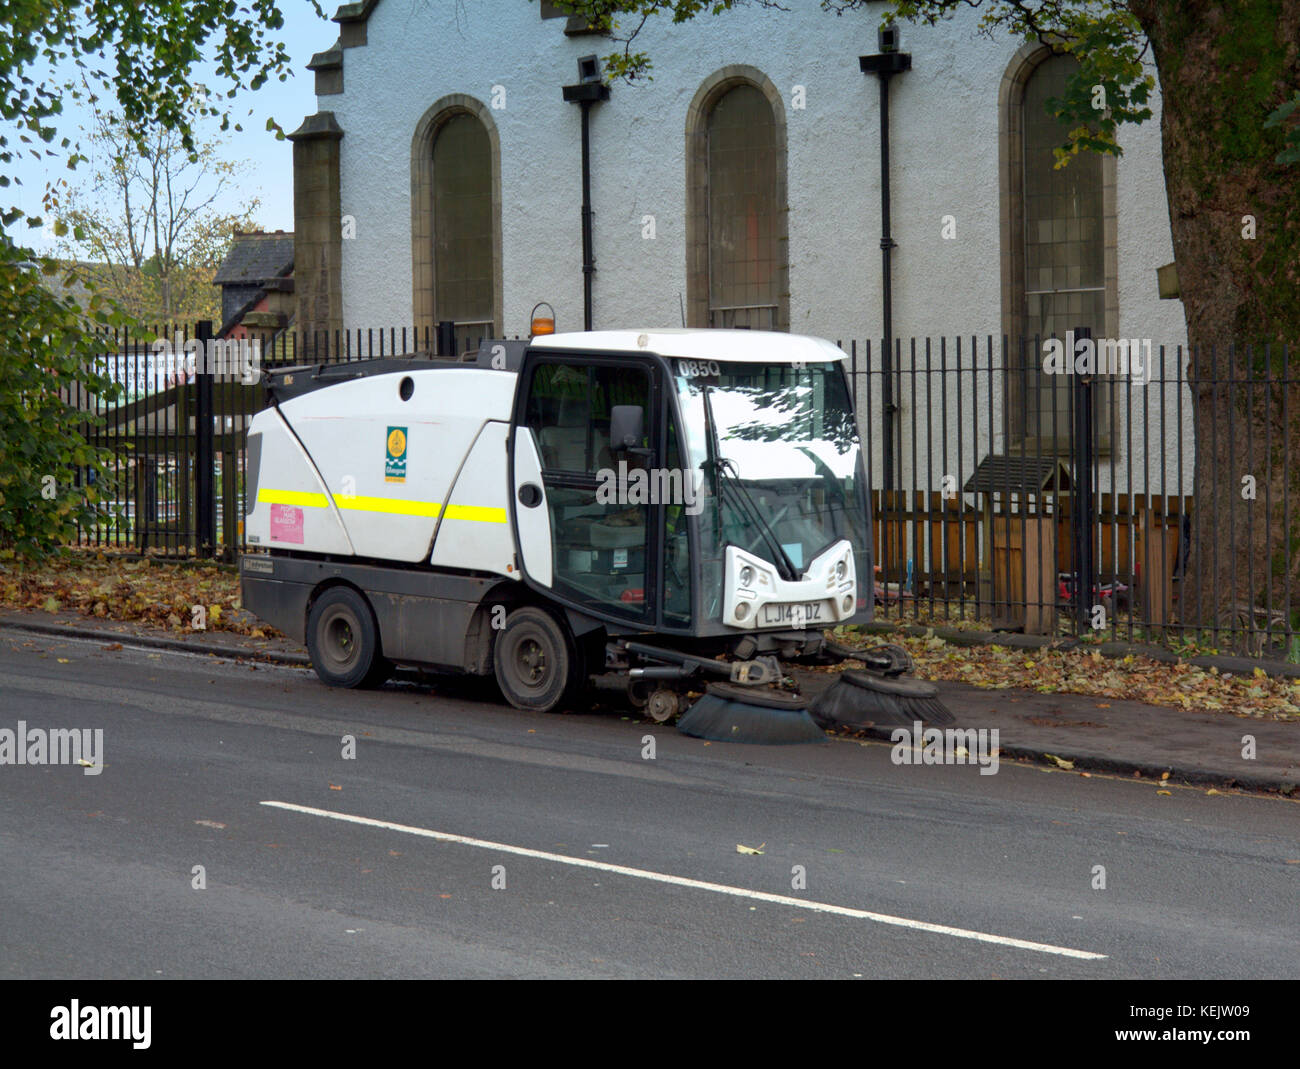 street sweeper street cleaner or a  machine that cleans streets a Mechanical sweeper Stock Photo